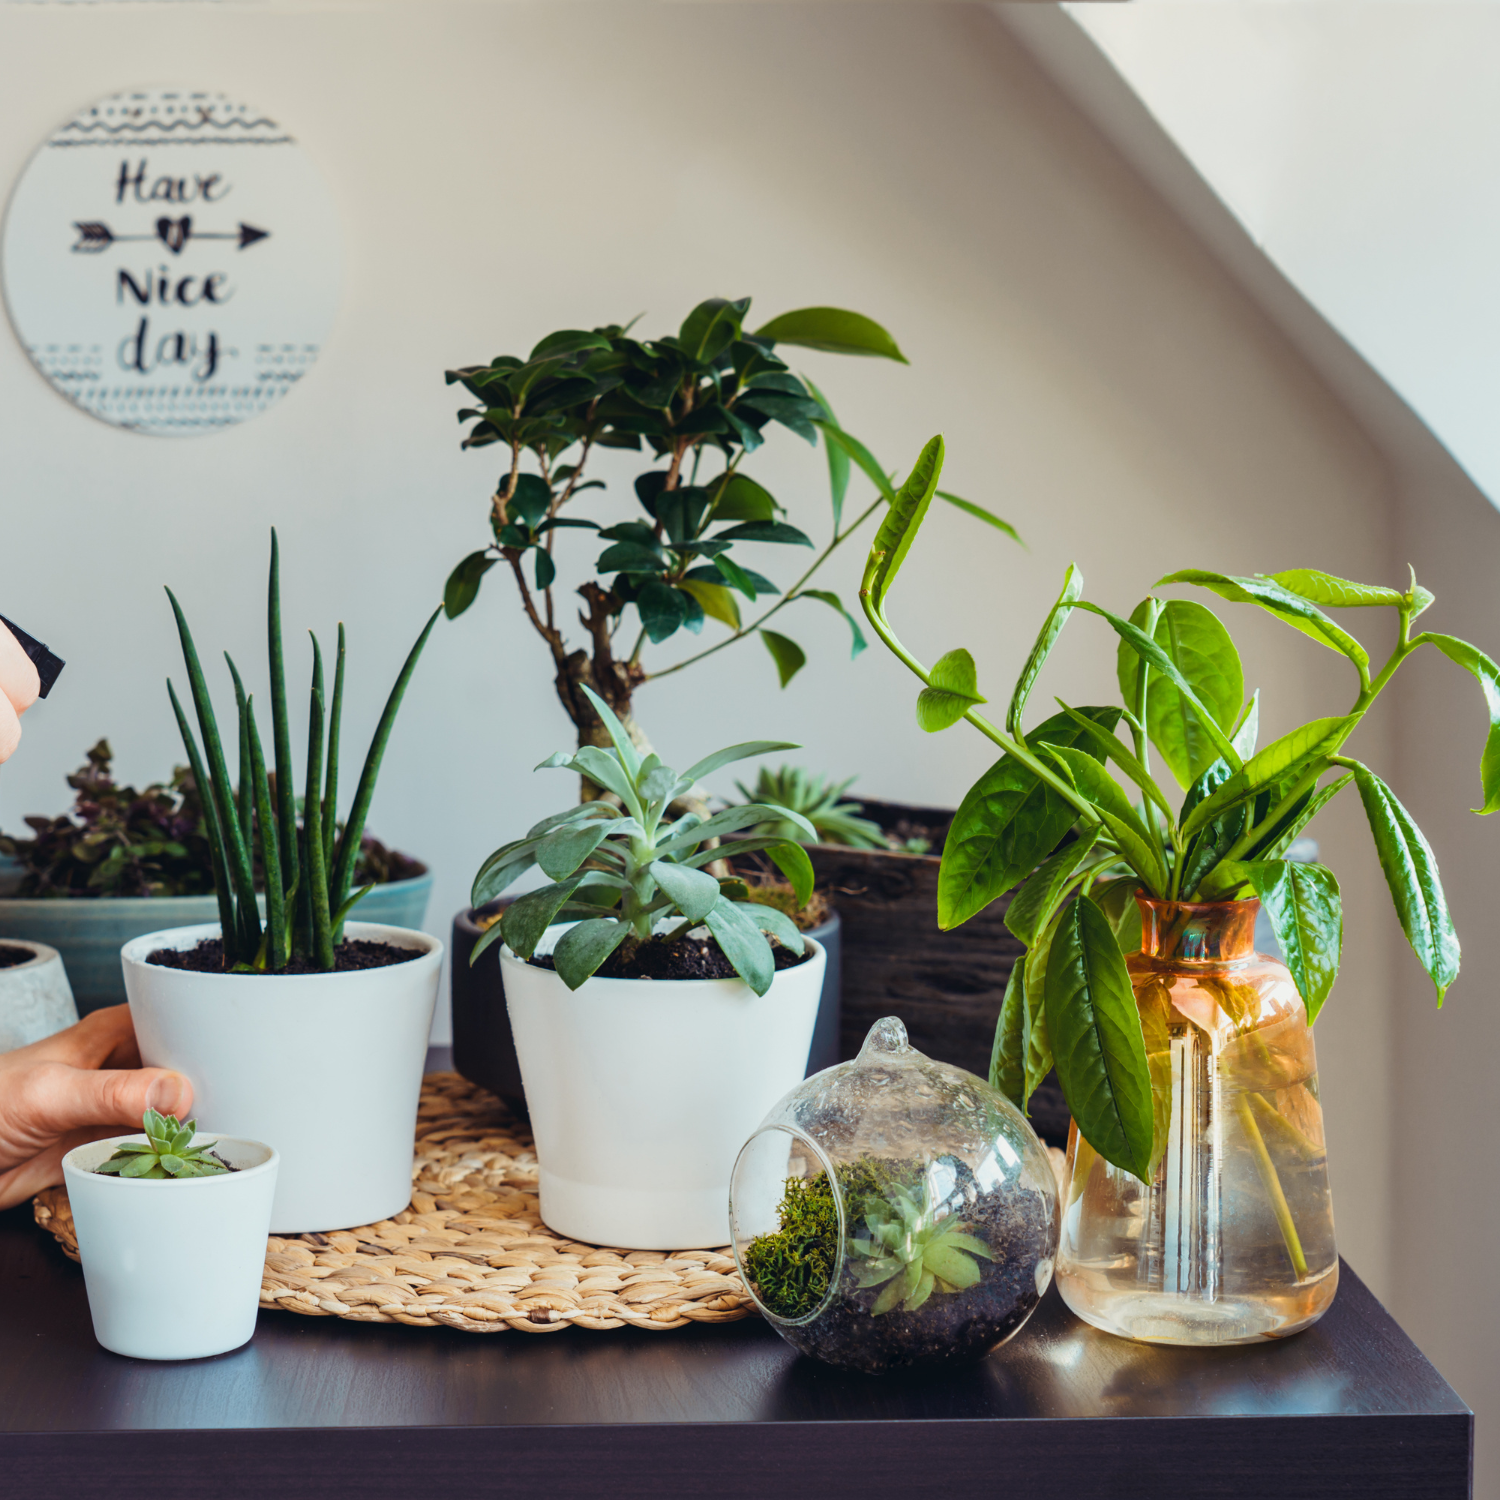 "Home decor with indoor plants: A guide to gardening for sustainability and air purification" - an image of various houseplants arranged in a living room setting